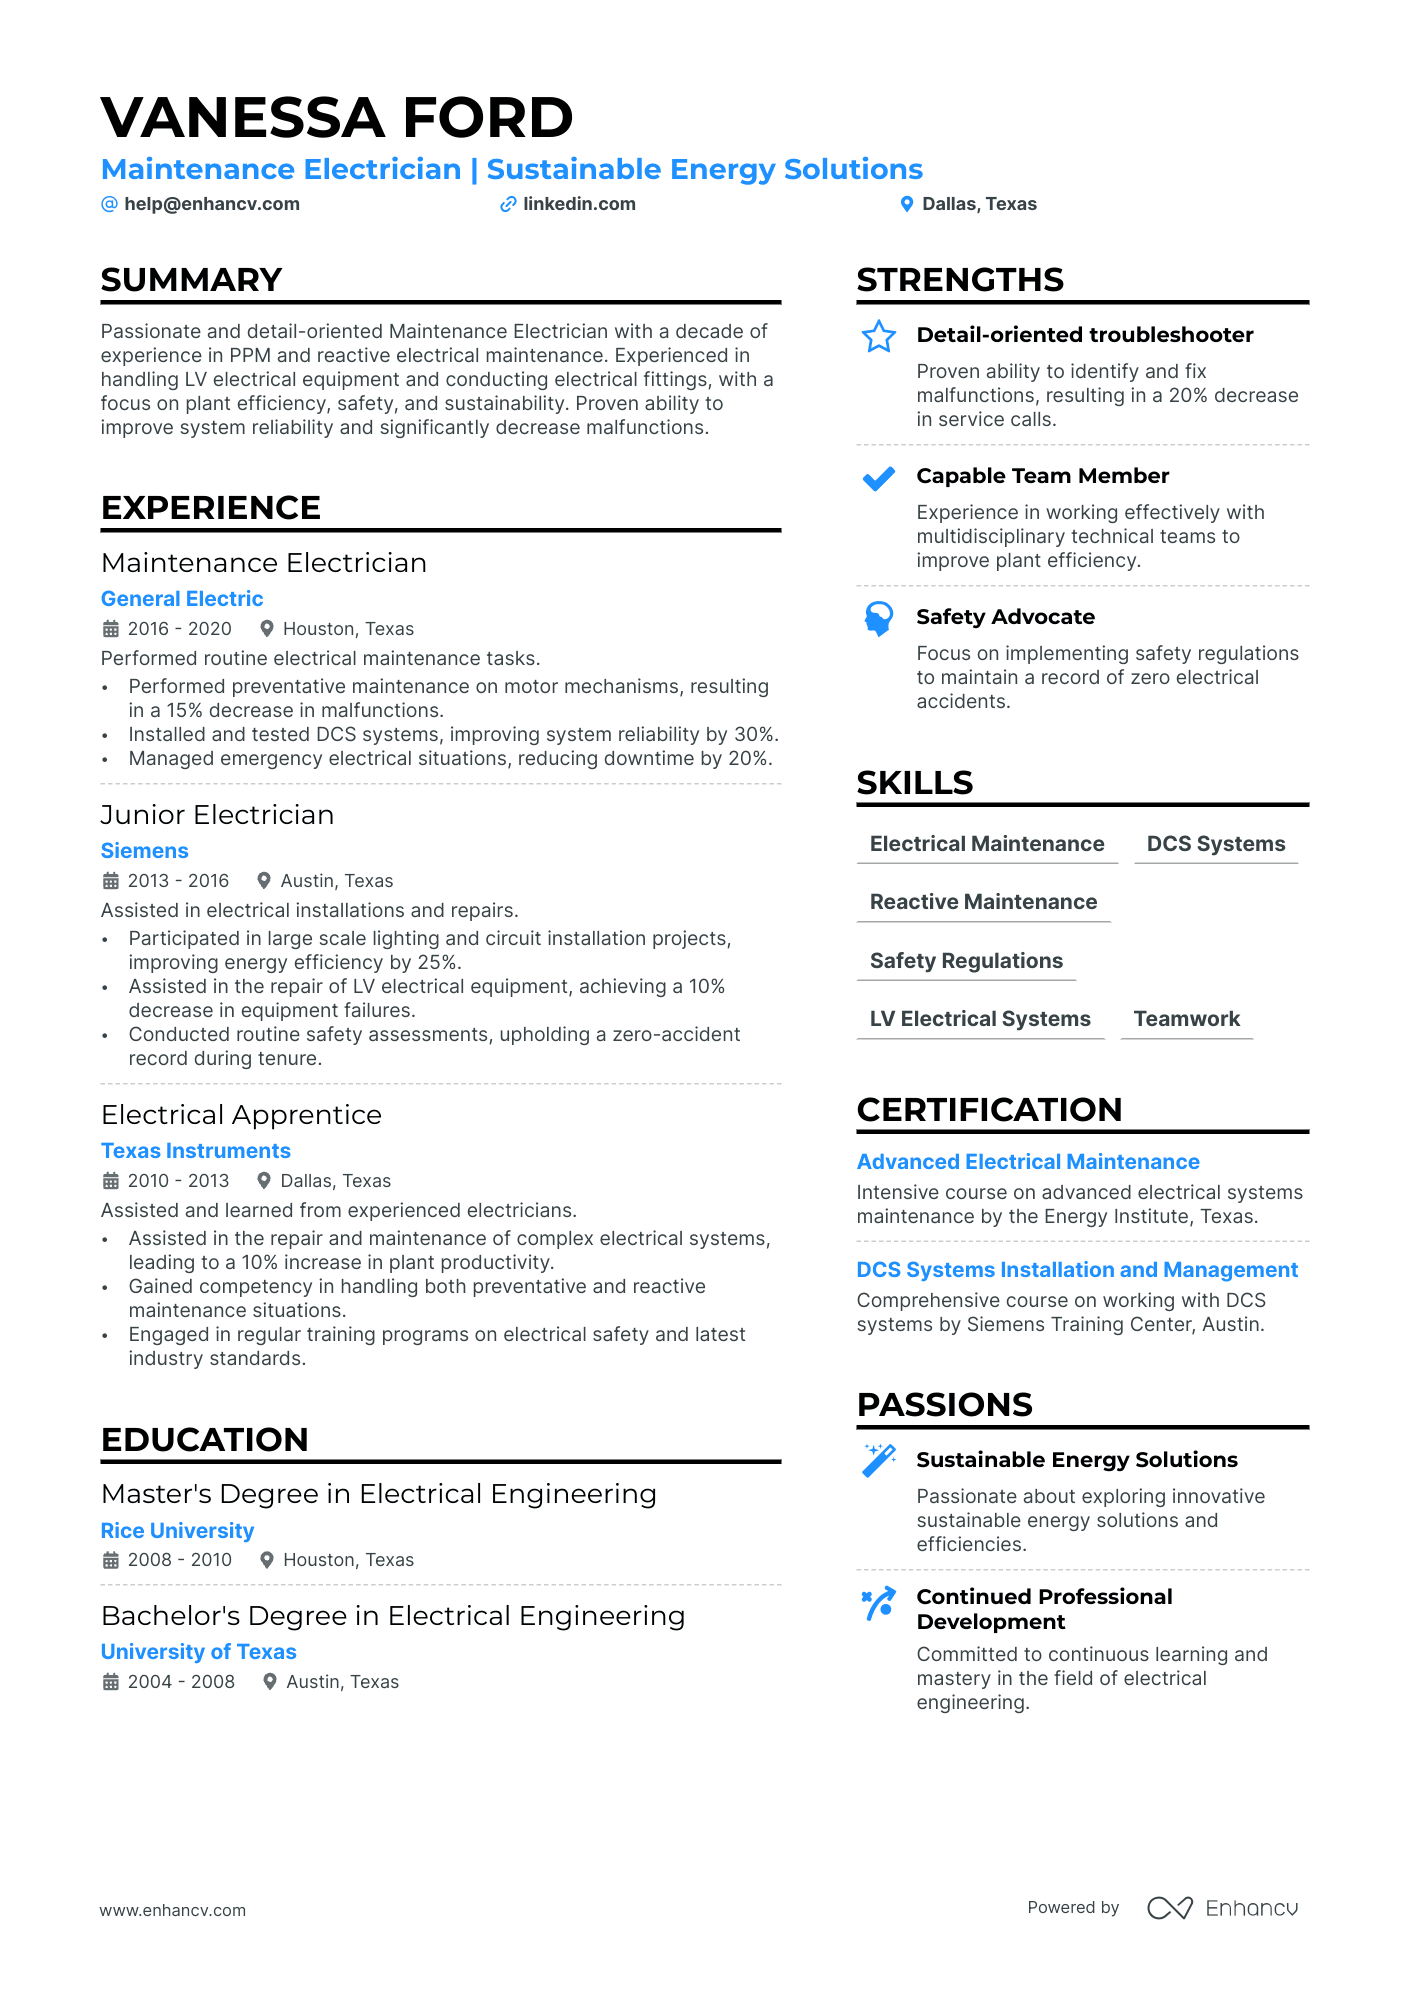 Maintenance Electrician resume example